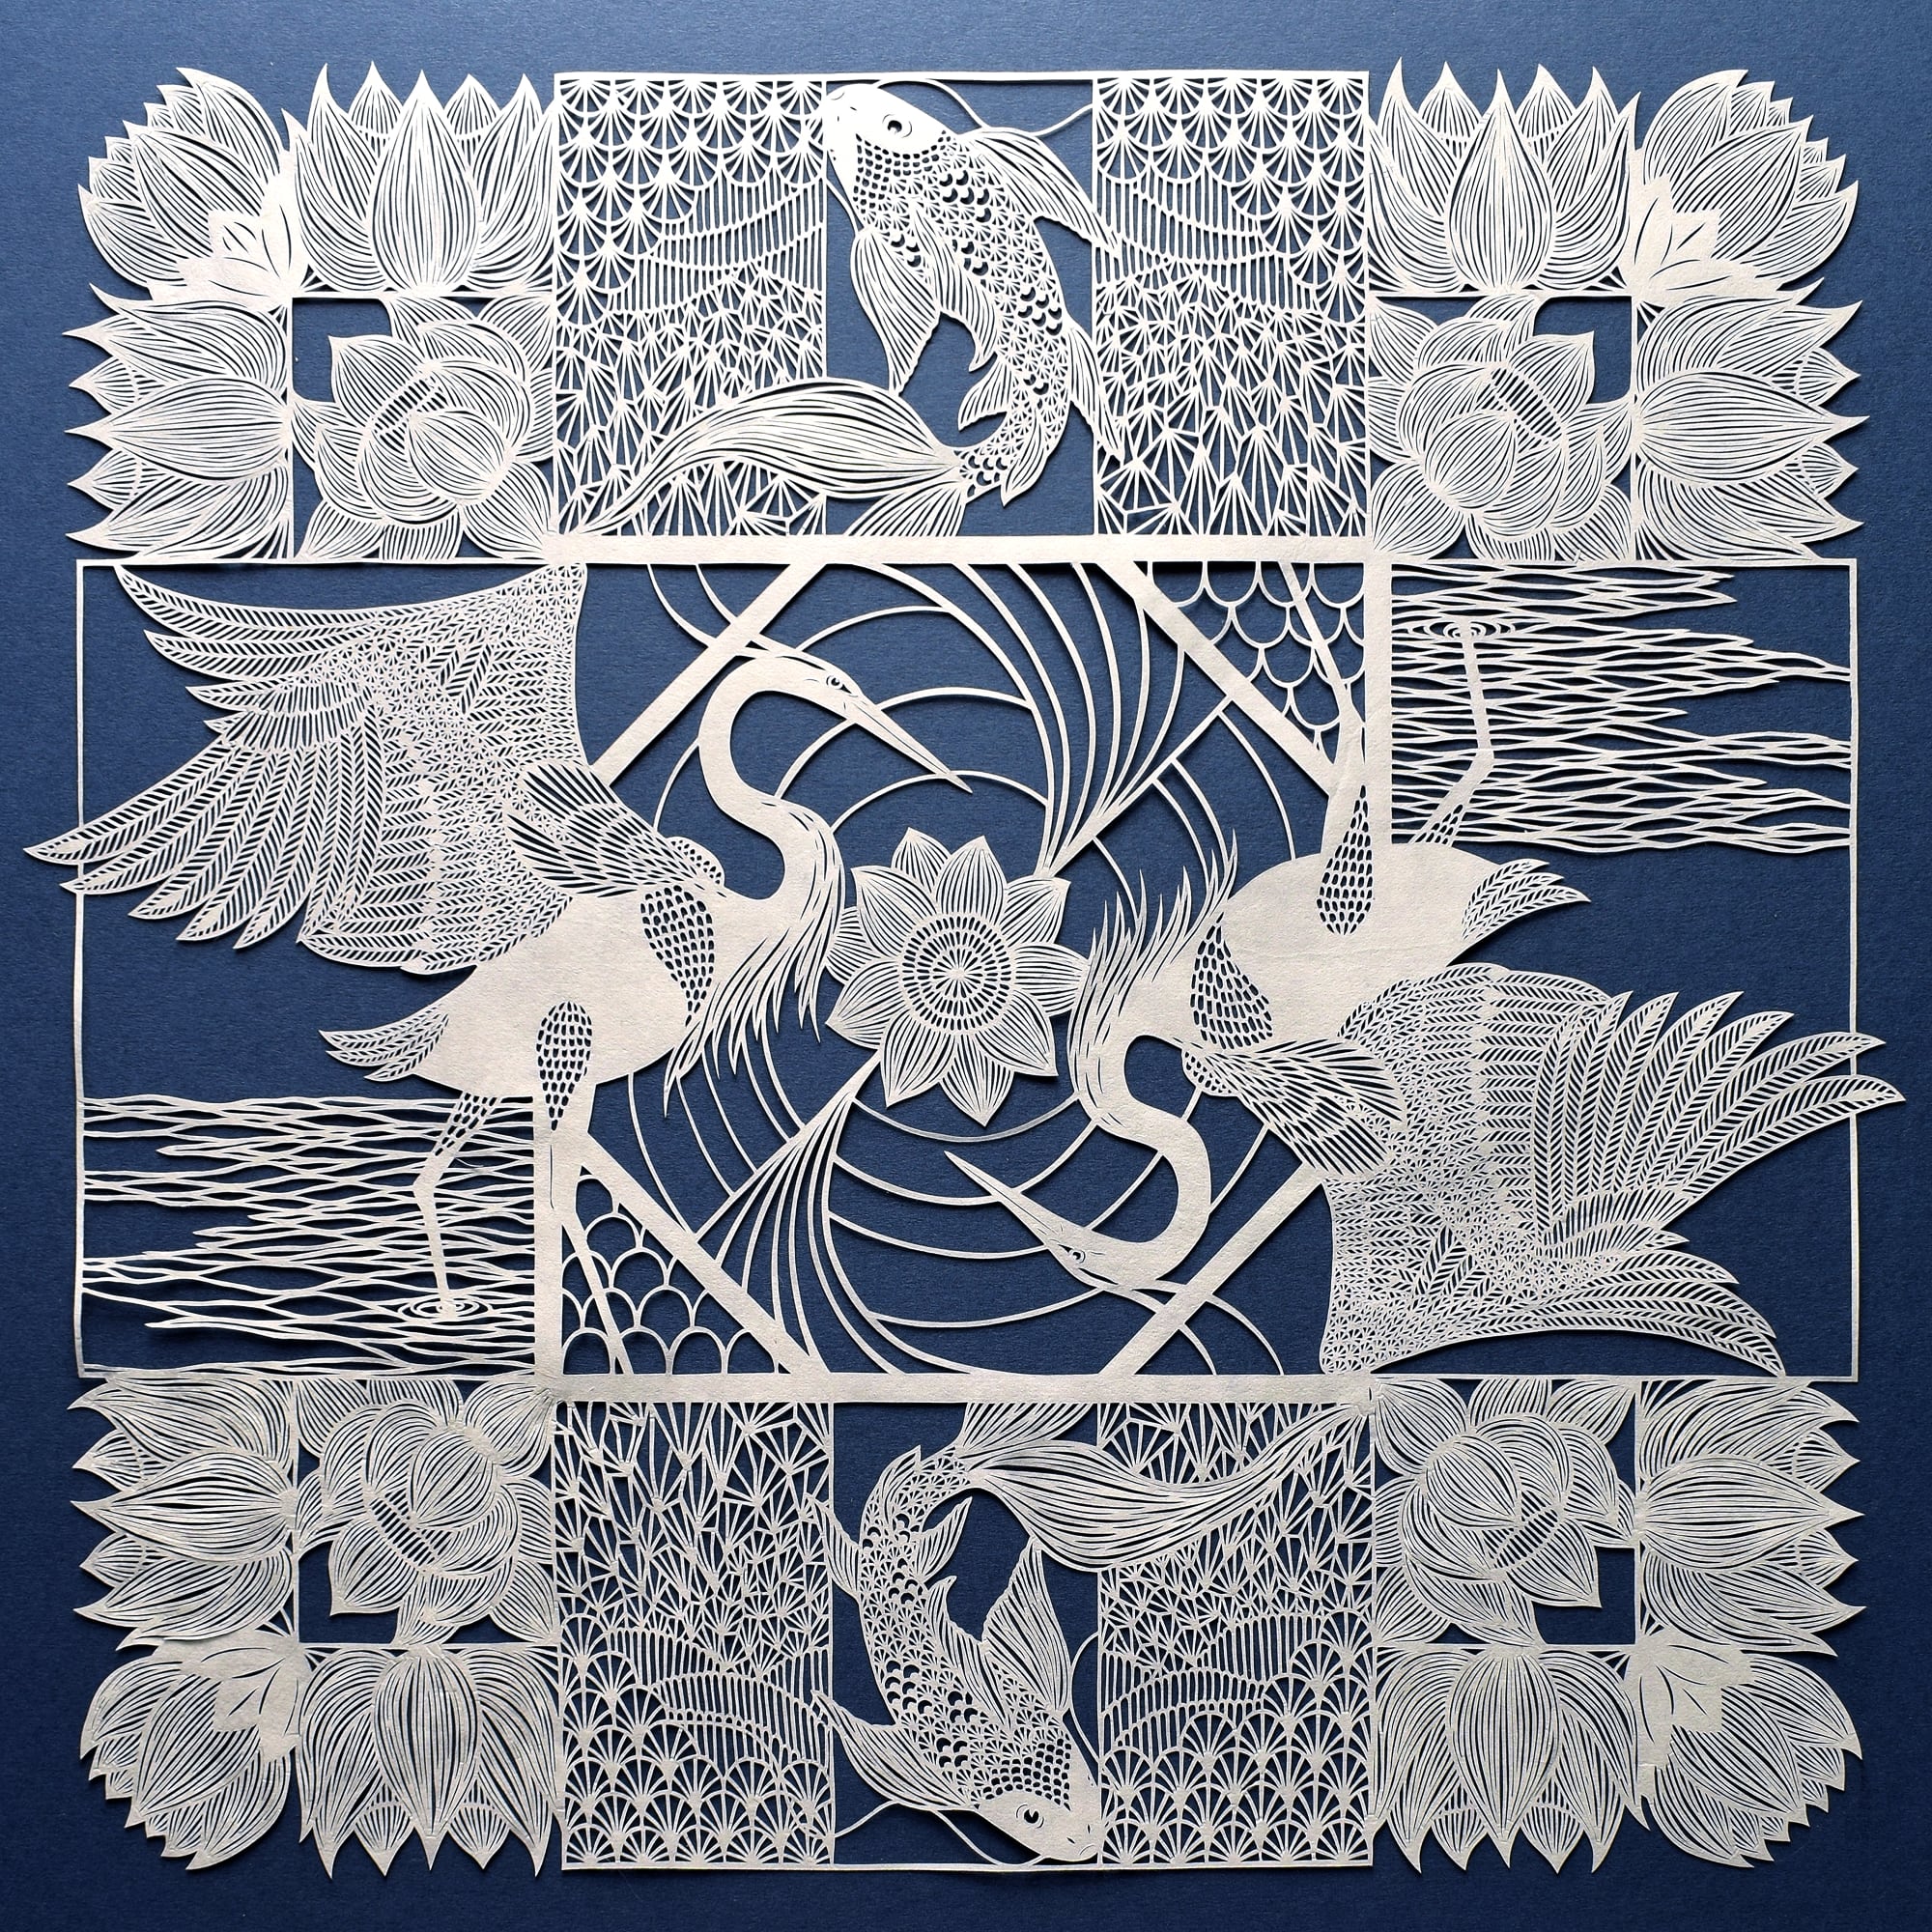 A square paper cut scene with herons, koi carp and flowers